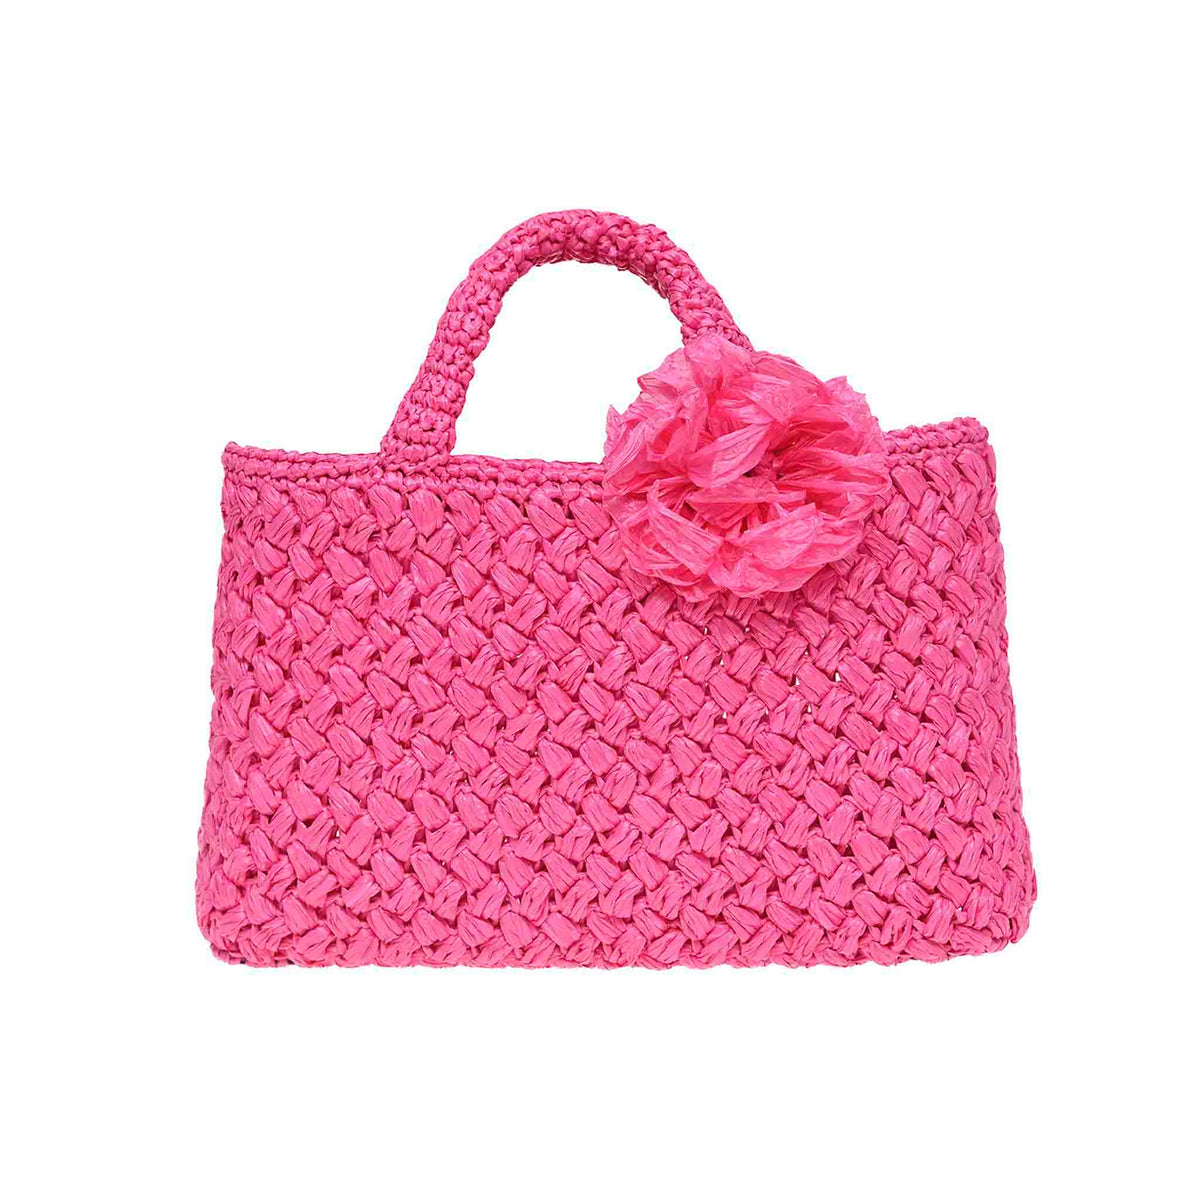 Fuchsia Positano Raffia Small Bag hand-woven raffia small bag, designed to complement your beach and shopping lifestyle from Carmen Sol